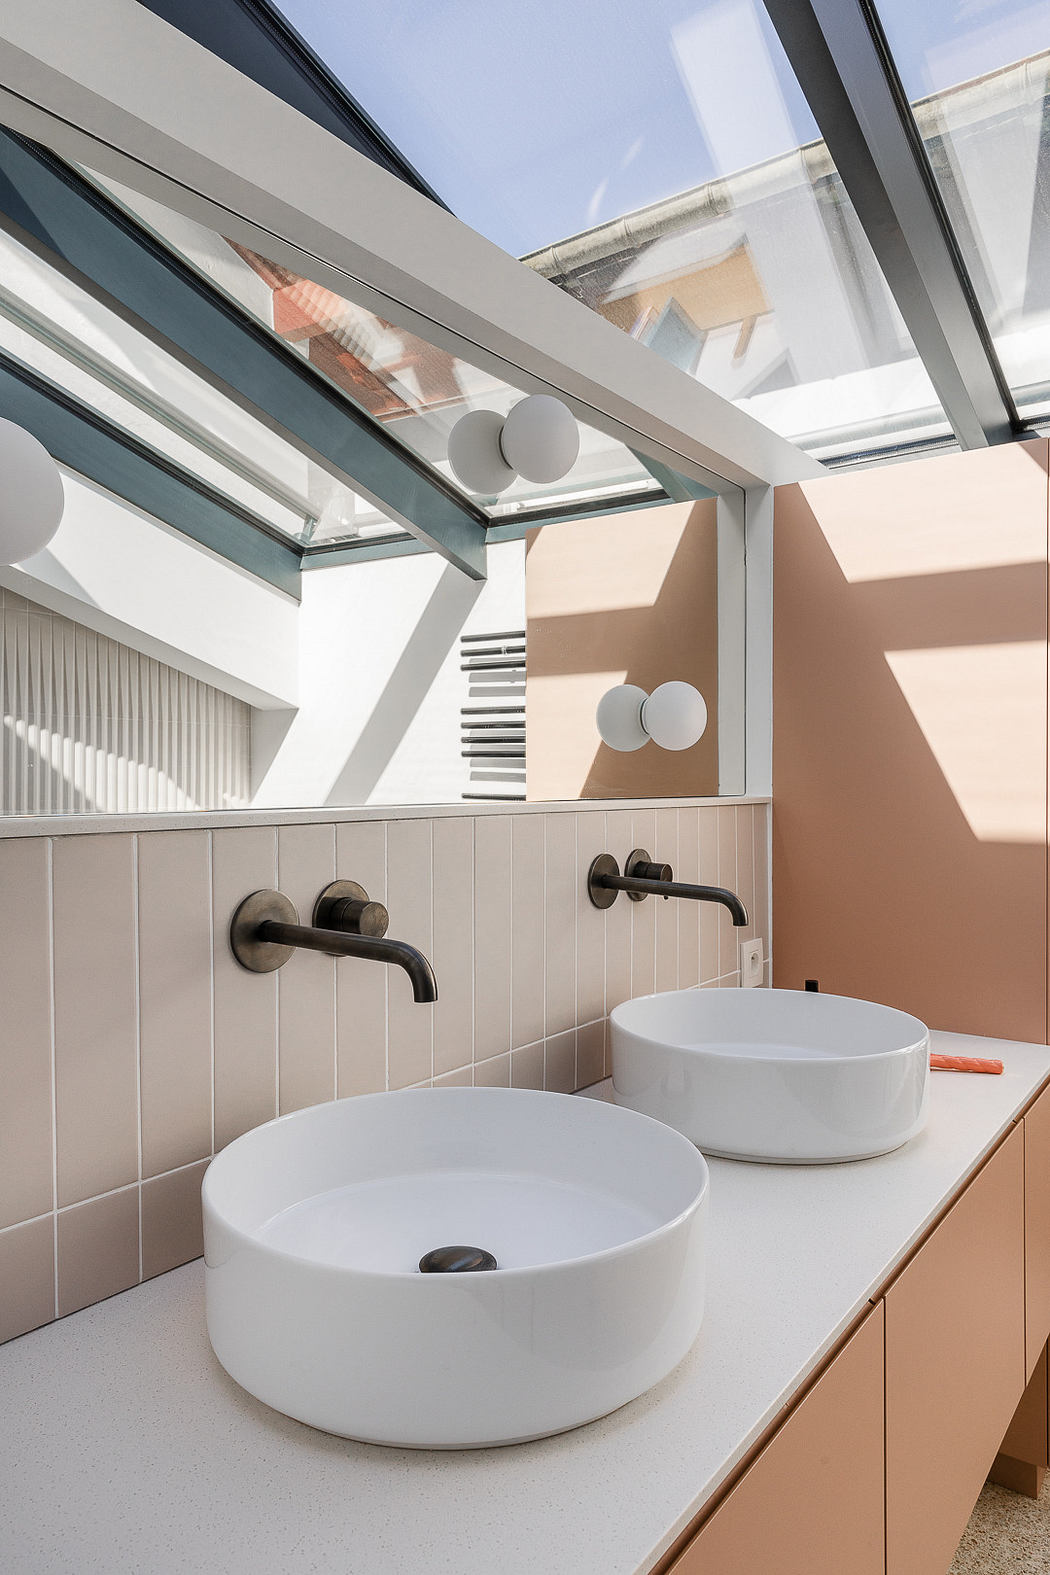 Modern bathroom with skylight, two vessel sinks, and pastel colors.